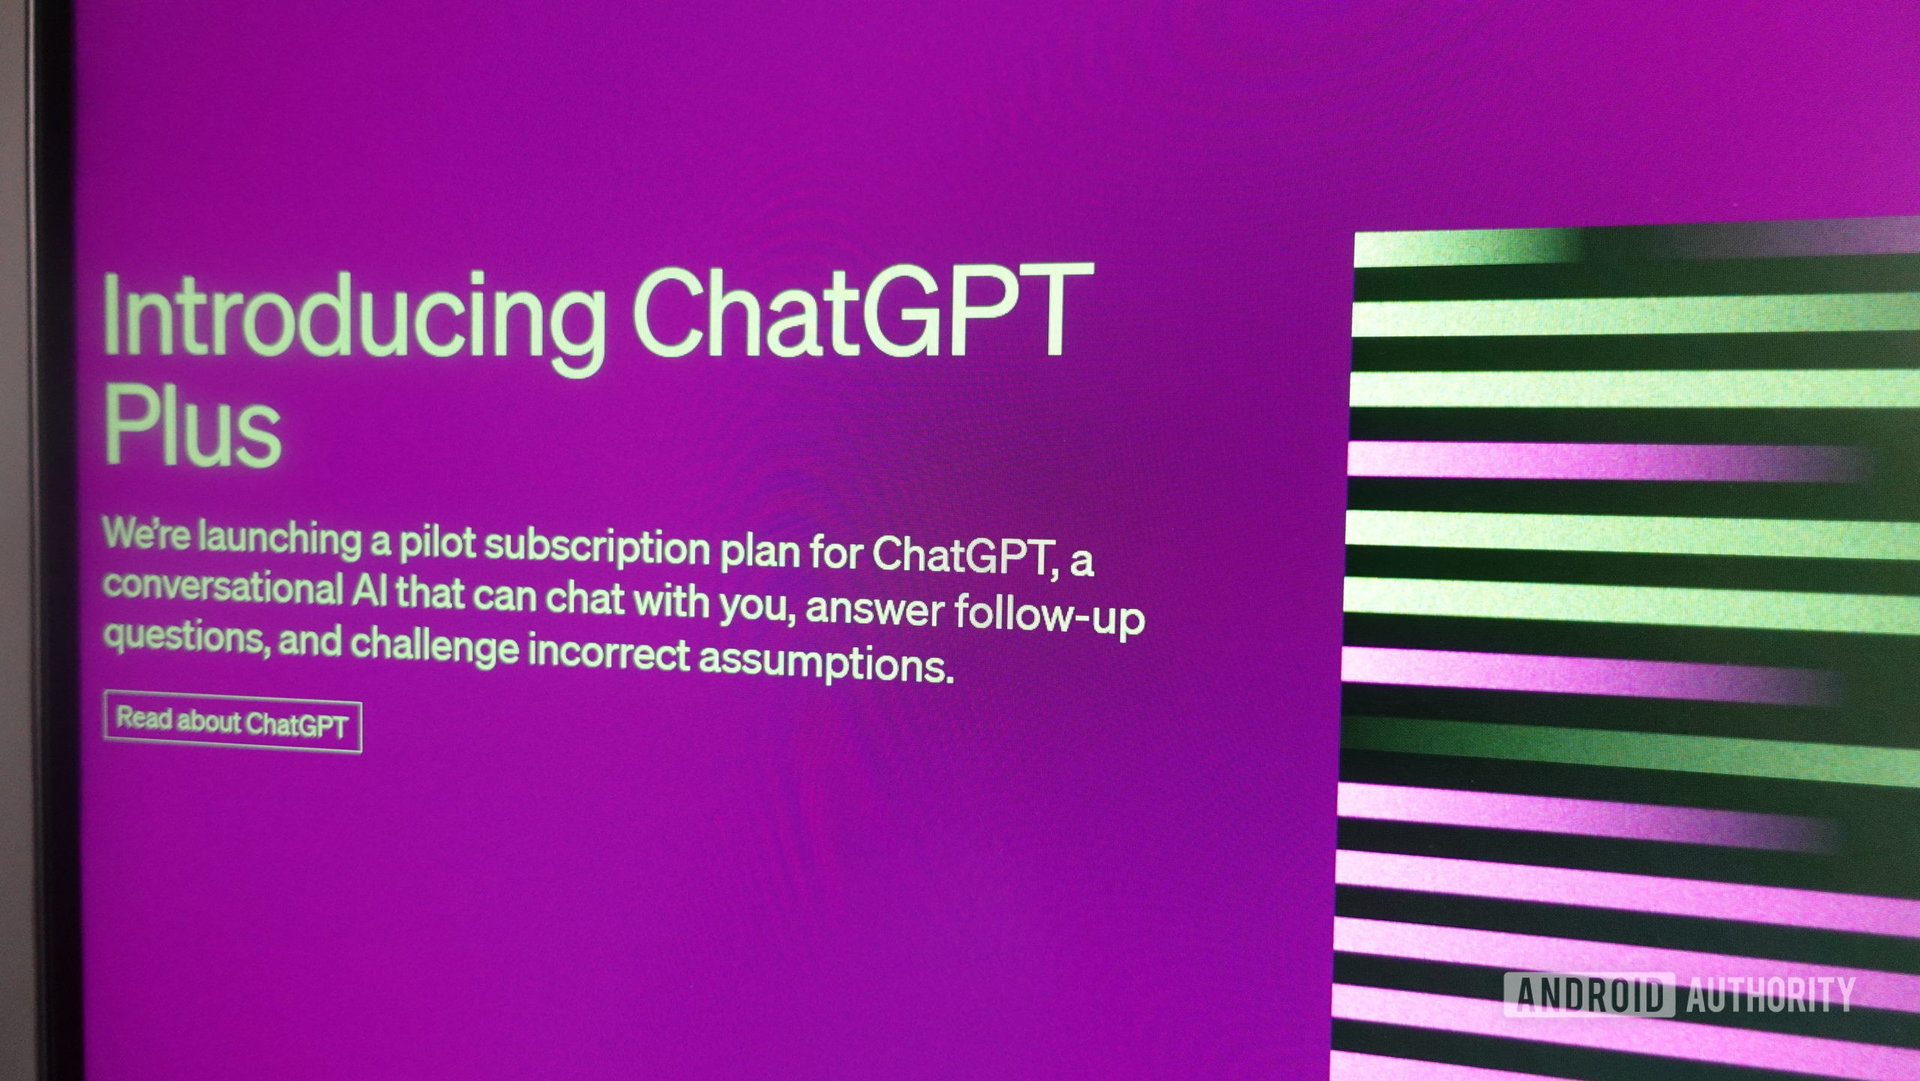 Does ChatGPT have an app for Android and iOS smartphones?